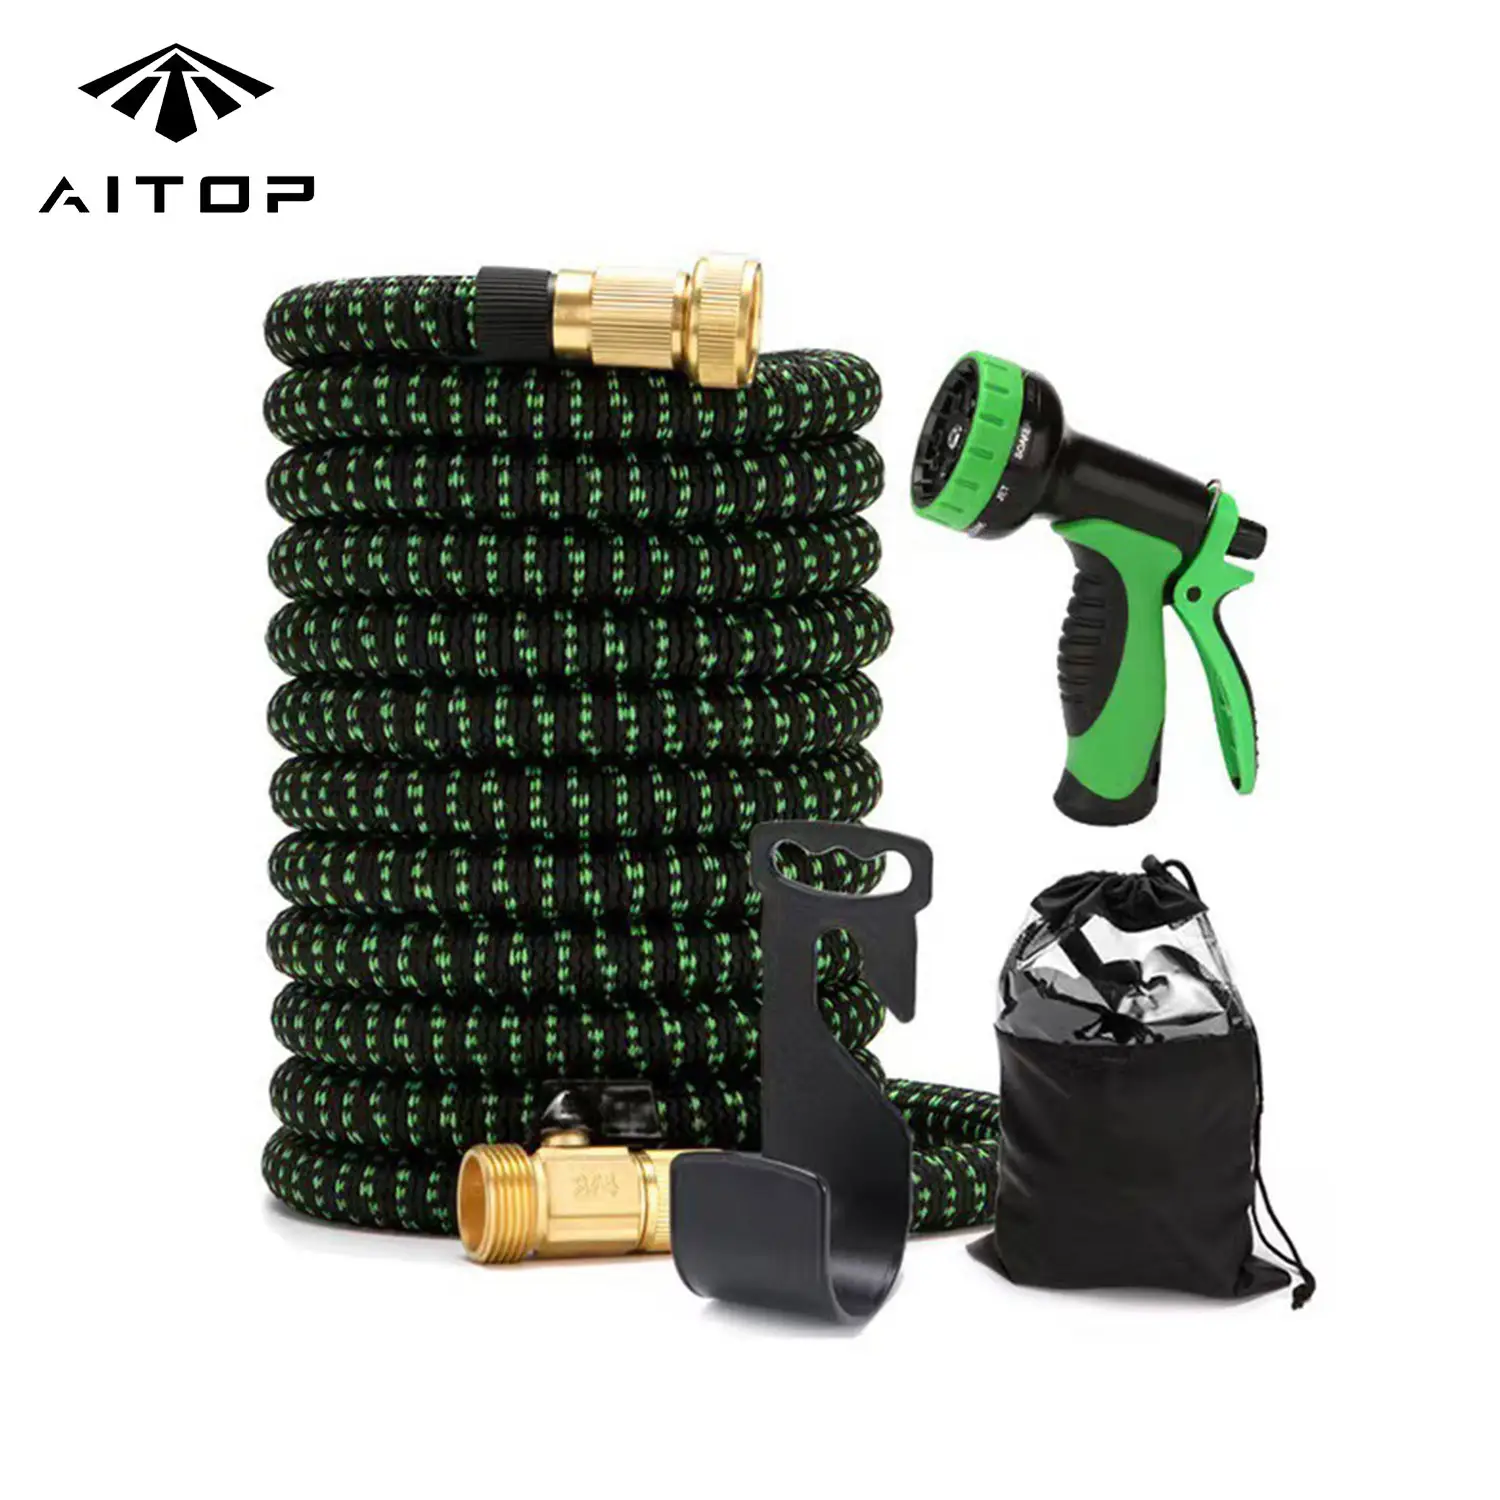 Flexible PVC rubber Garden Hose Upgraded Water Hose With 10 Function Spray Nozzle With Solid Brass Connectors